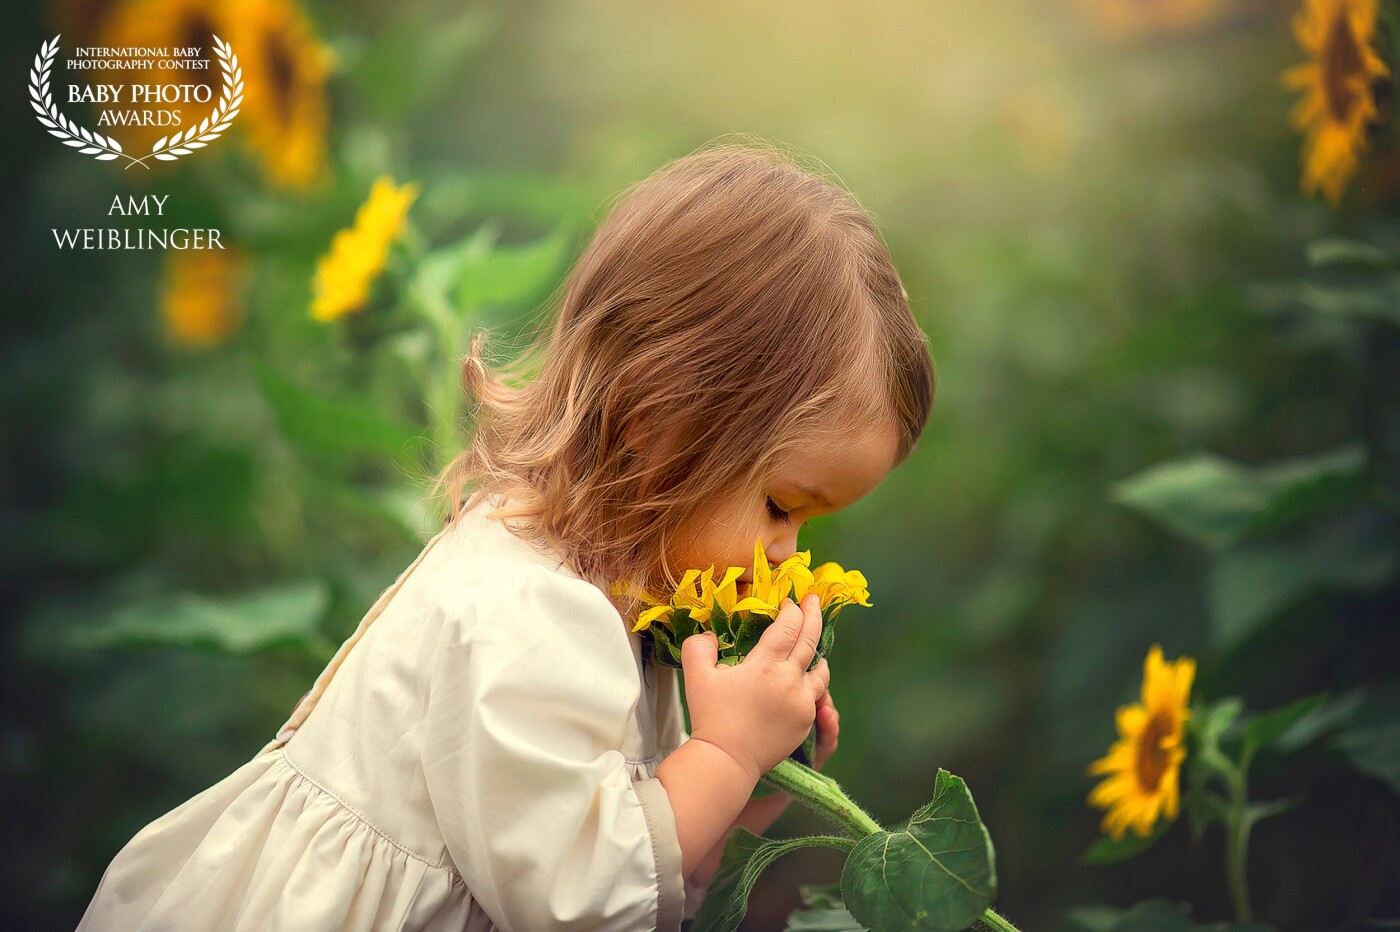 My baby girl adores flowers, so I was very happy to capture this sweet moment of her enjoying something that she loves in nature. 